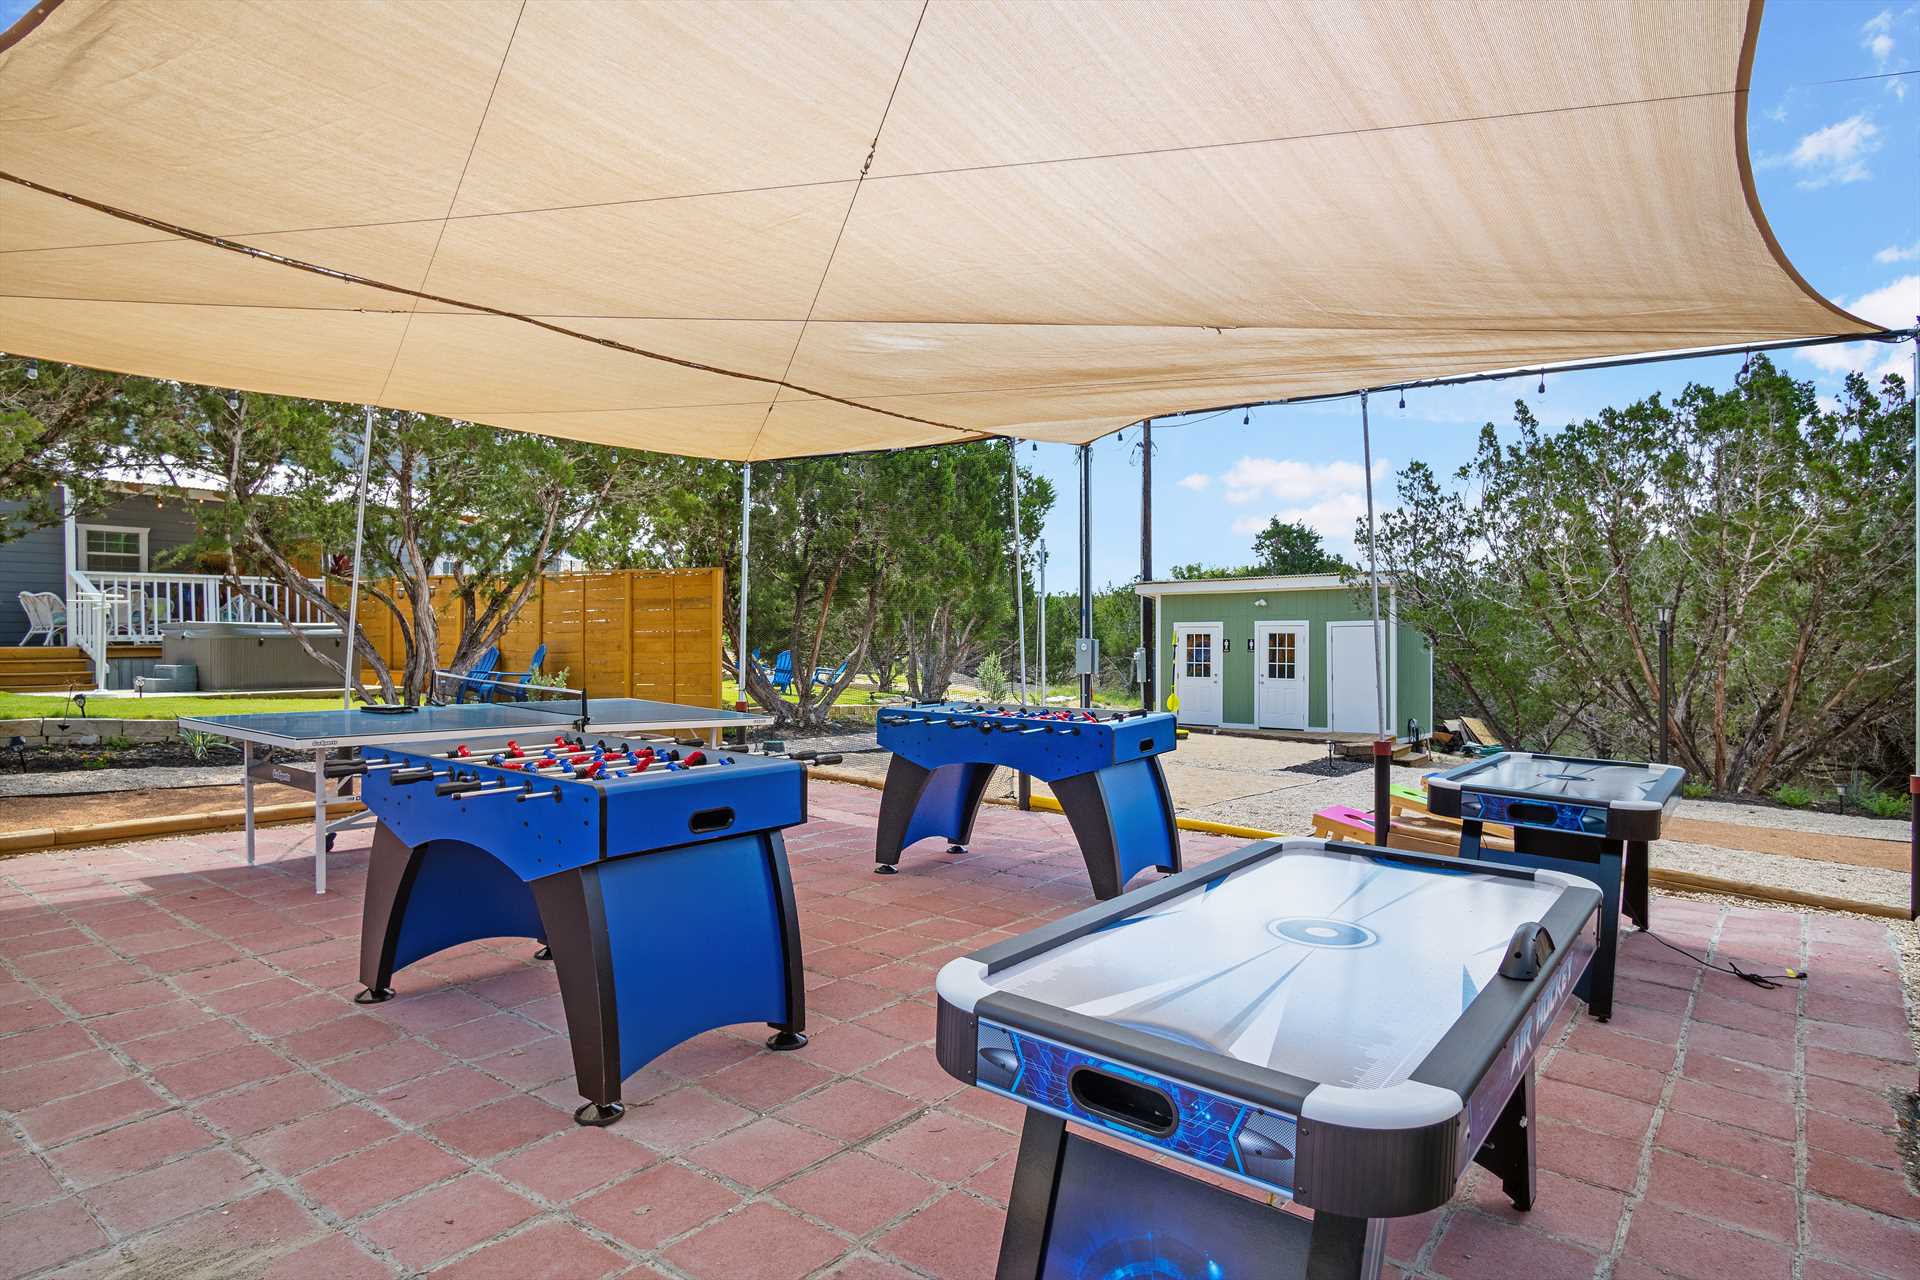                                                 The outdoor gaming area has tons of room and equipment for activities! Keep in mind you may be sharing the space with other guests.